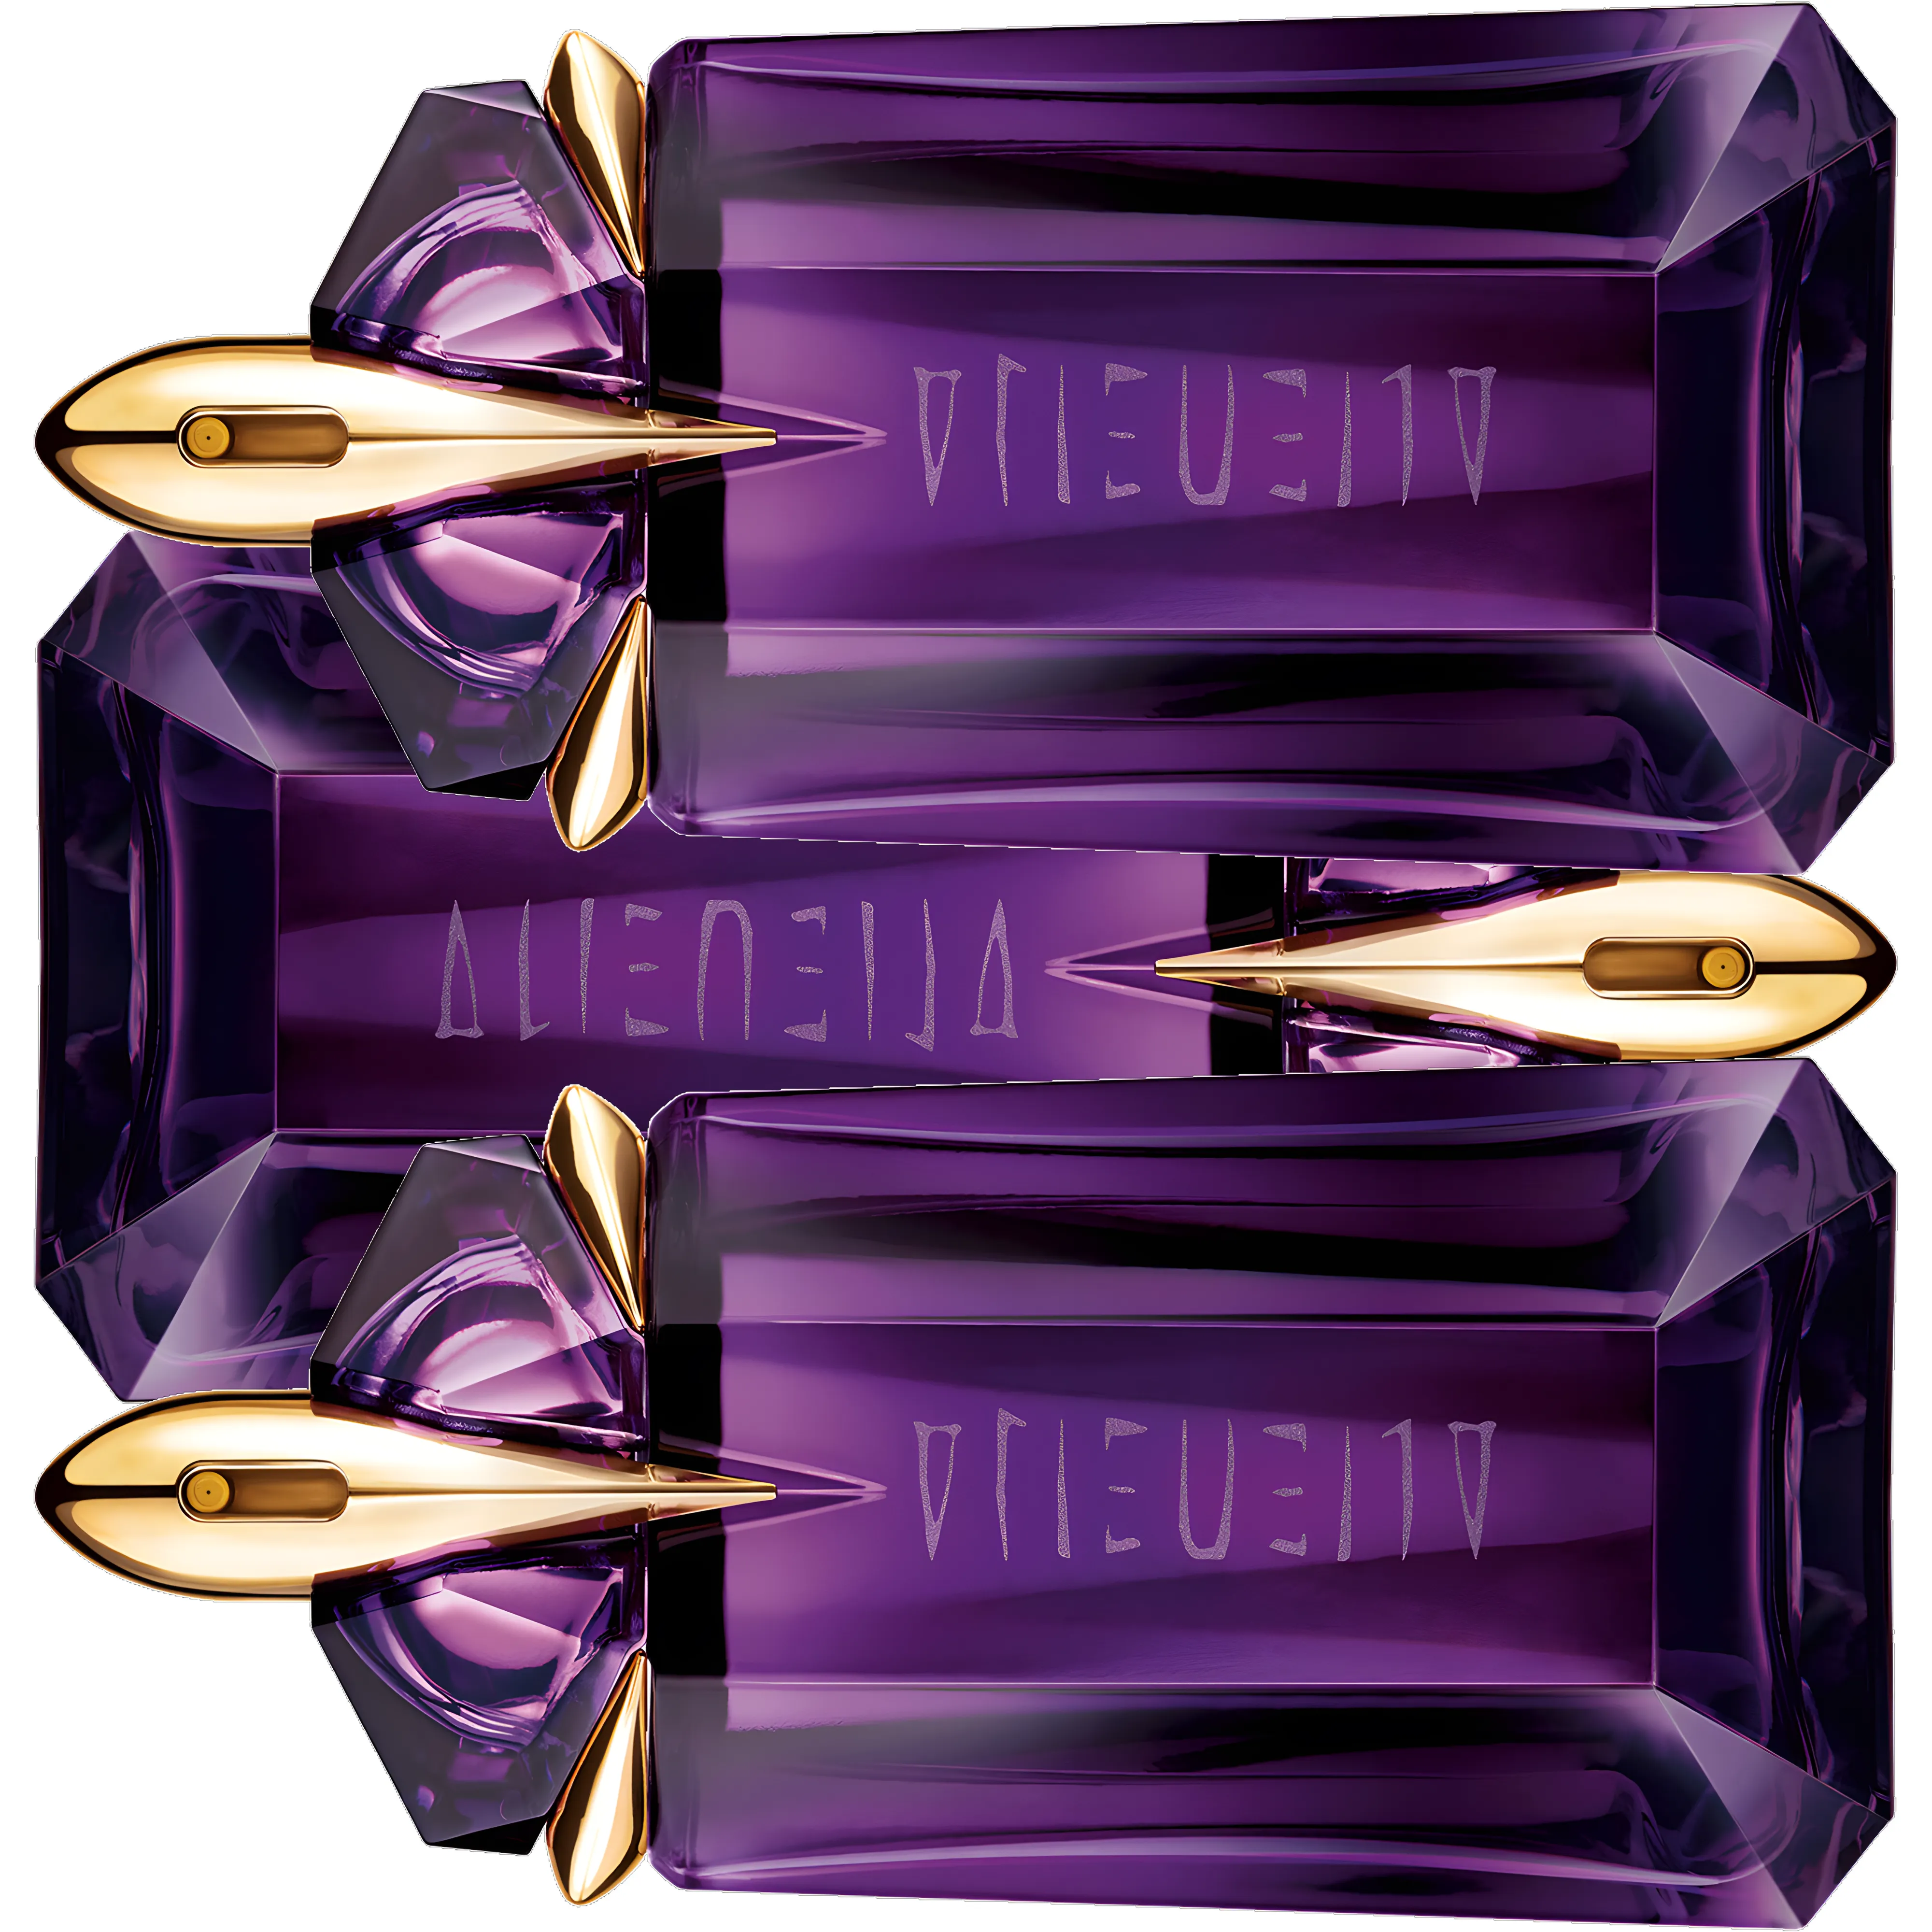 Free Alien Perfume From Mugler - 35,000 Available